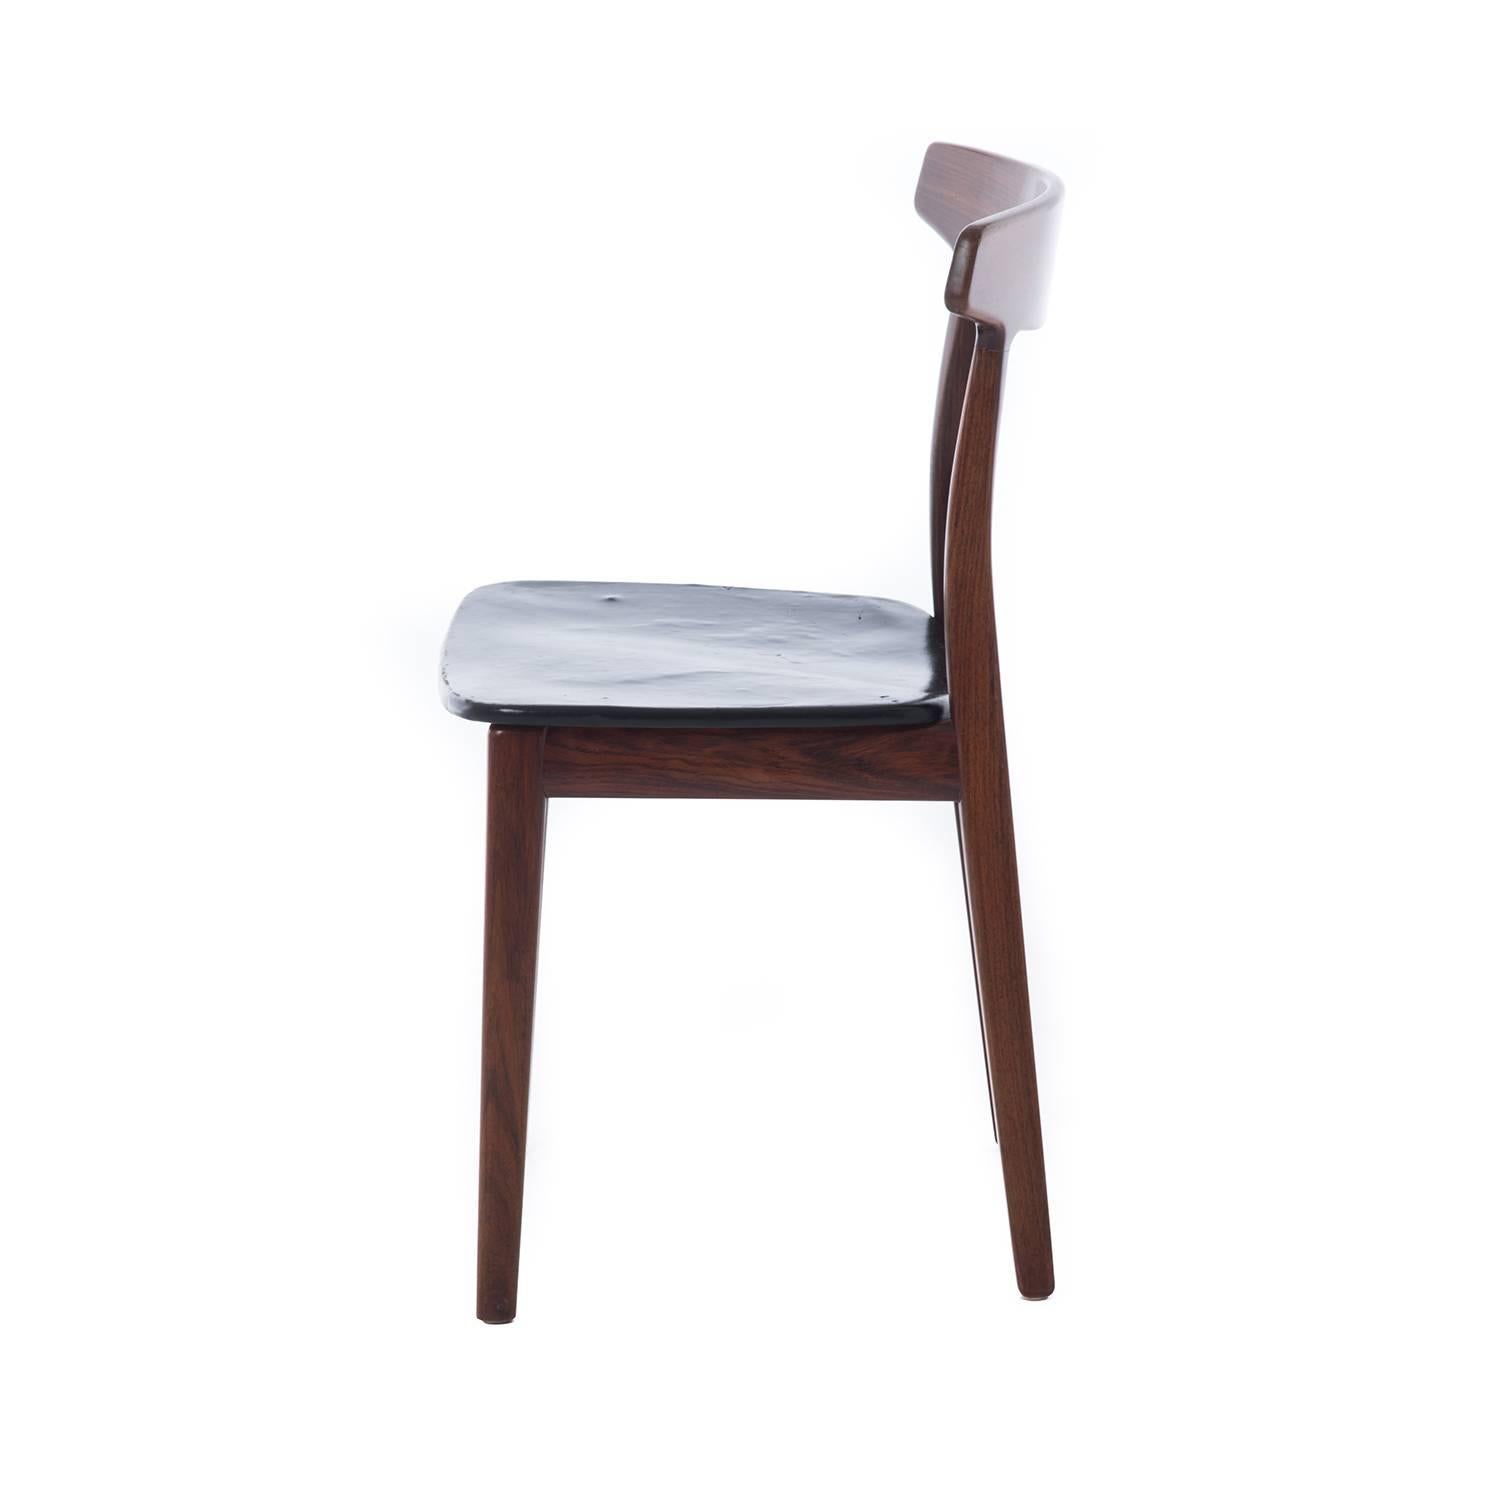 A sculptural stand alone that could be used in a variety of settings. The leather on this chair has been replaced and is new, mid-20th century modern Scandinavian design.

Professional, skilled furniture restoration is an integral part of what we